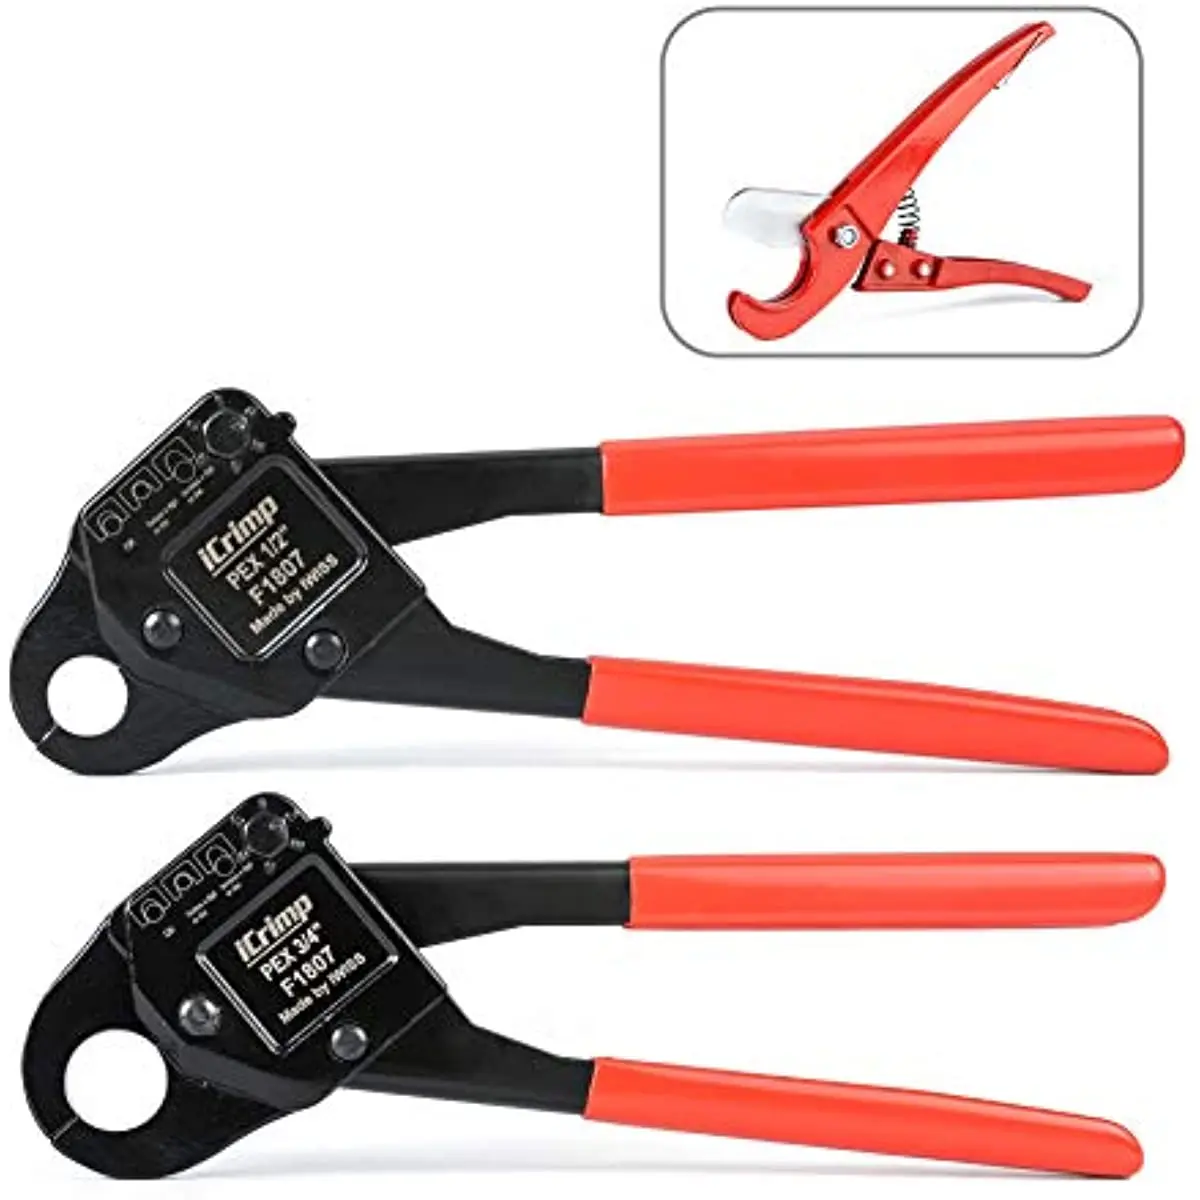 IWISS Angle PEX Crimper for 1/2-inch & 3/4-inch PEX Copper Crimp Rings and Barbed PEX Fitting, C/w PEX Tubing Cutter